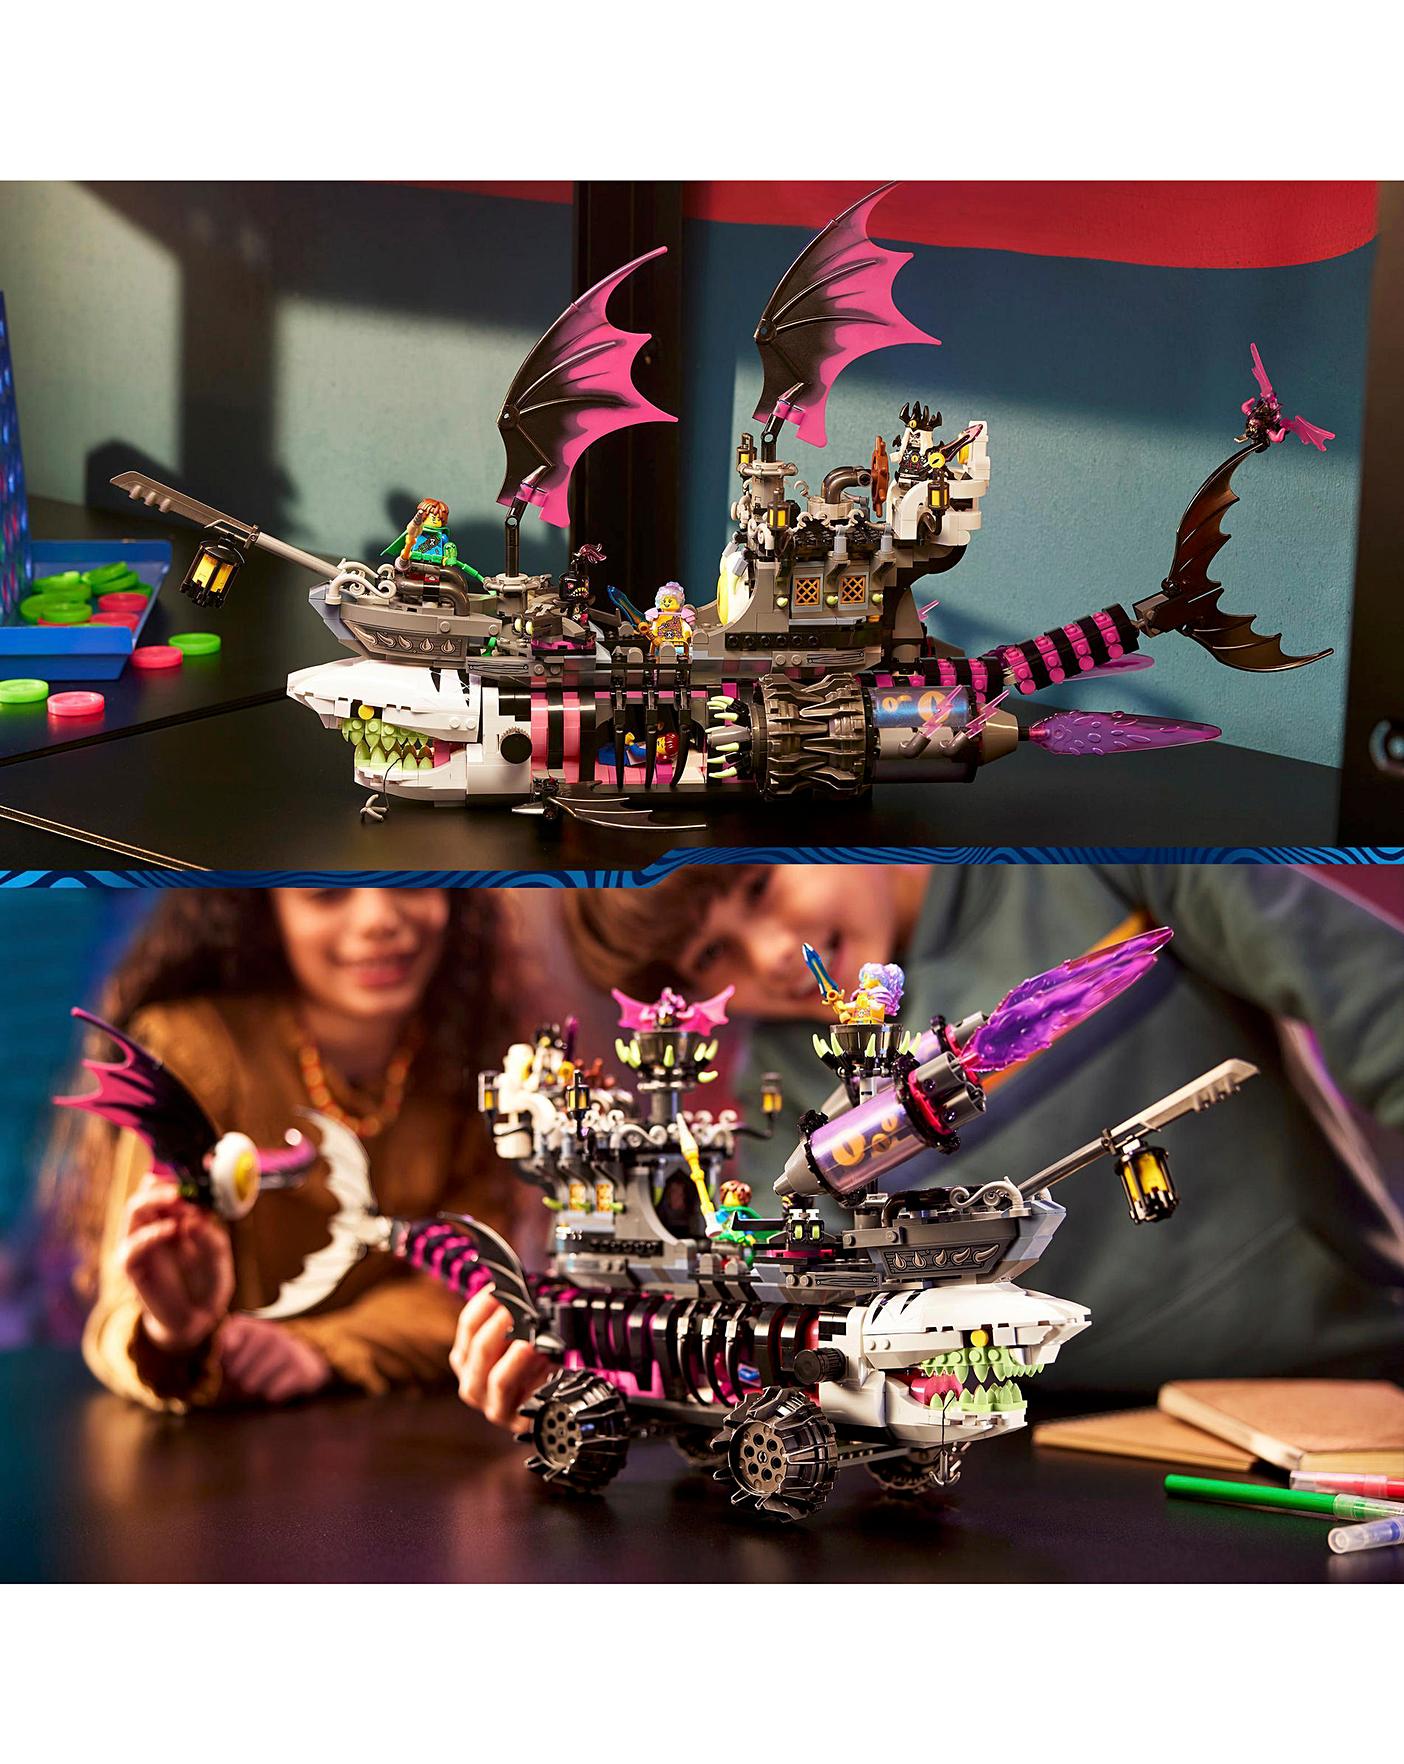  LEGO 71469 DREAMZzz The Nightmares Shark Ship Build A 2-Way  Pirate Boat Toy, Construction Kit with Minifigures Mateo, Nova & The King  of Nightmares, for Kids : Toys & Games